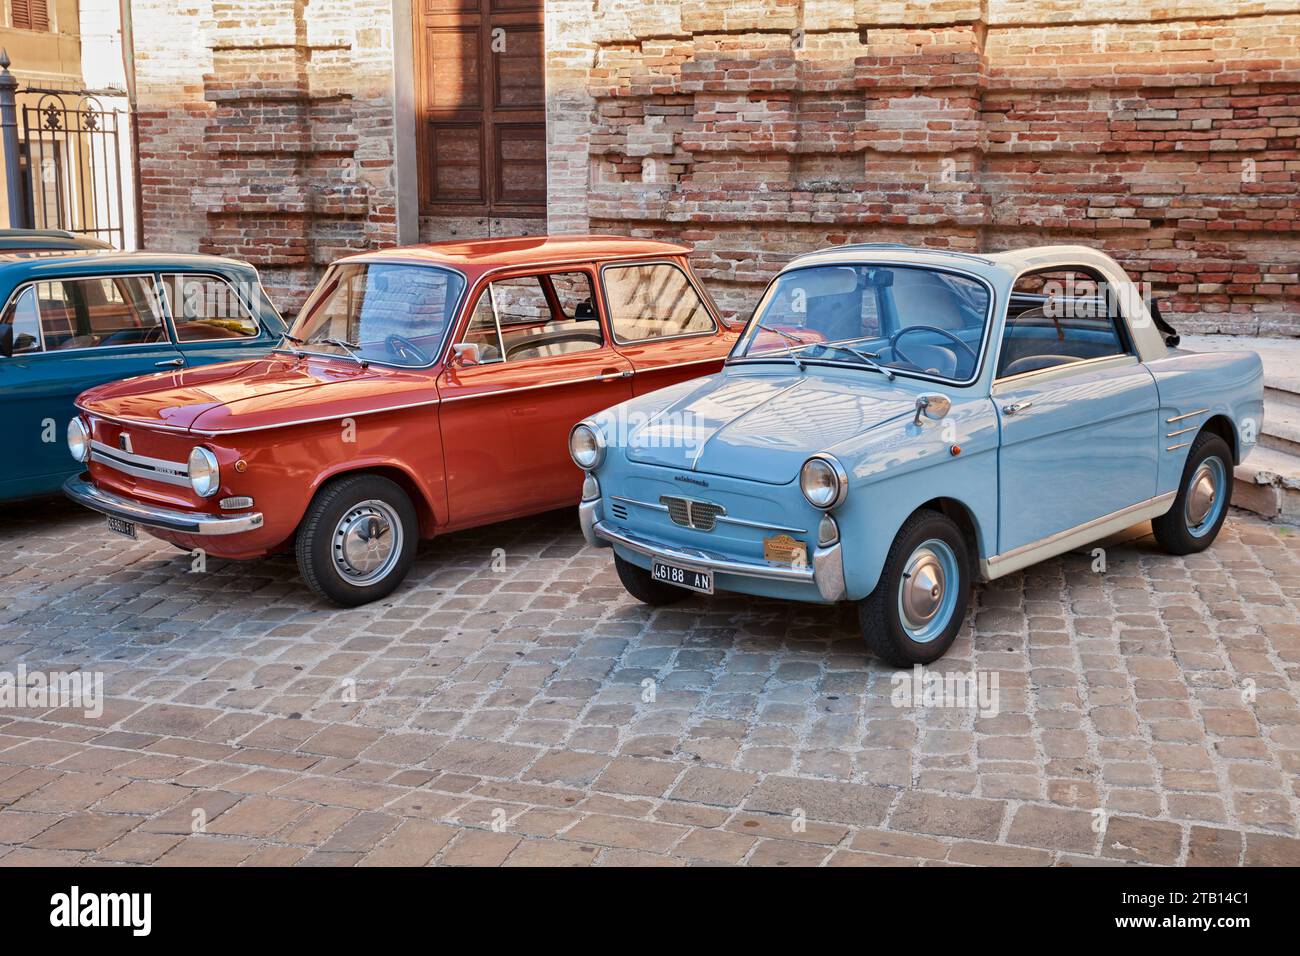 Vintage cars NSU Prinz 4L (1972) and Autobianchi Bianchina Trasformabile (car based on Fiat 500 - 1959) in classic car meeting in Jesi, AN, Italy - Se Stock Photo